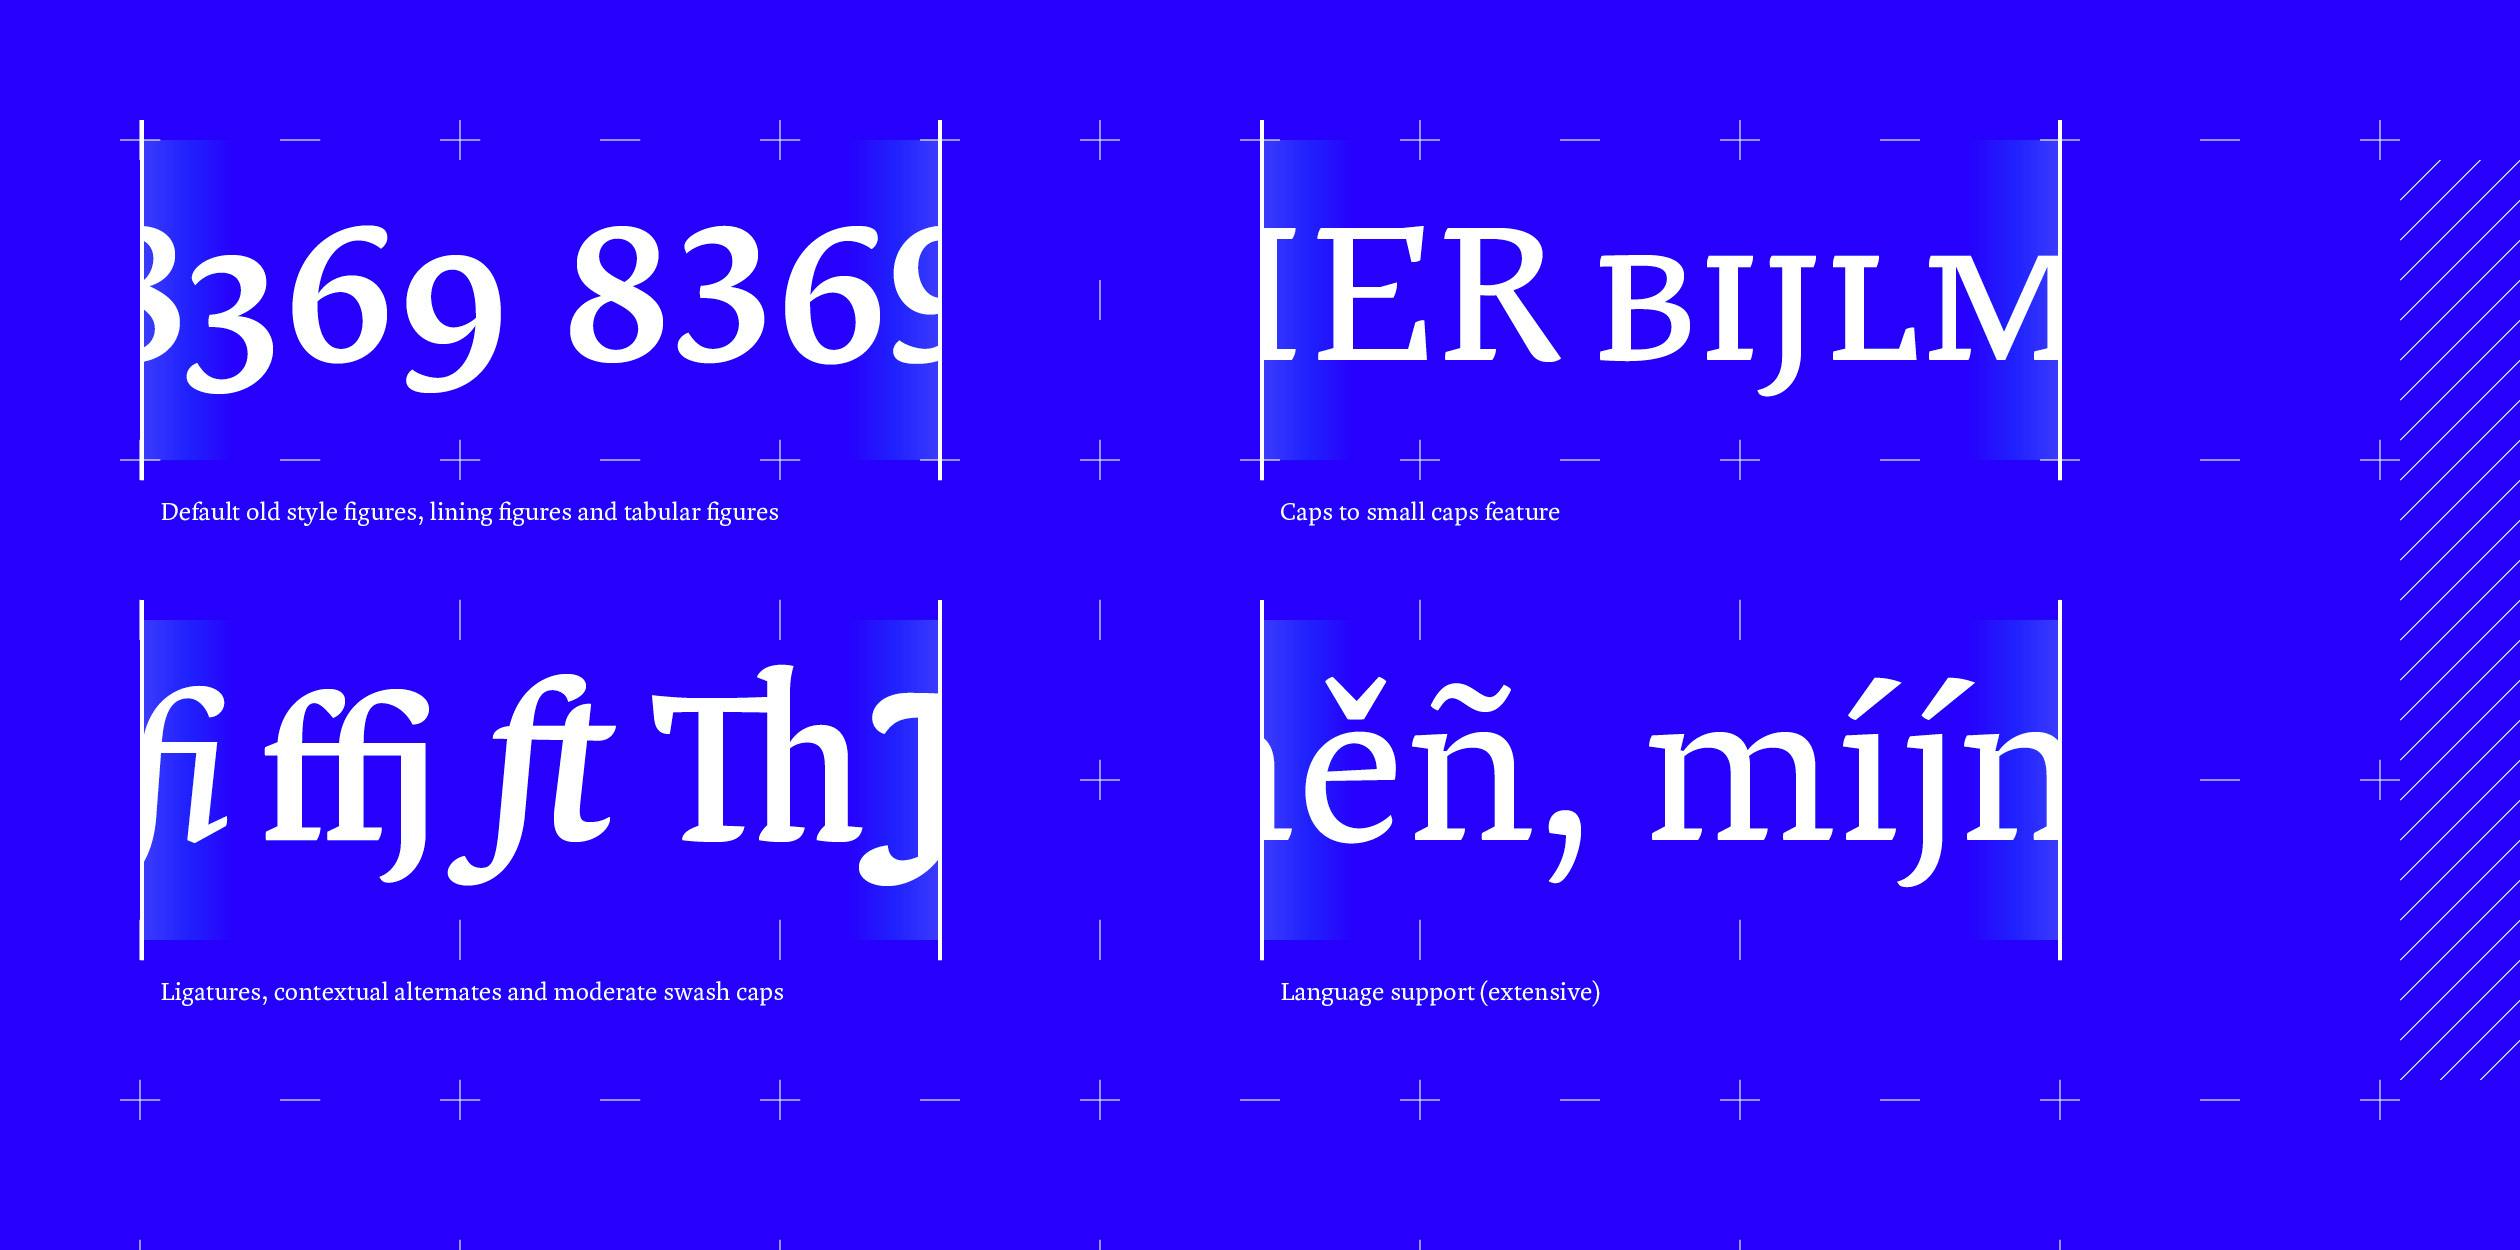 Image of Pint typeface project from Jasper Terra